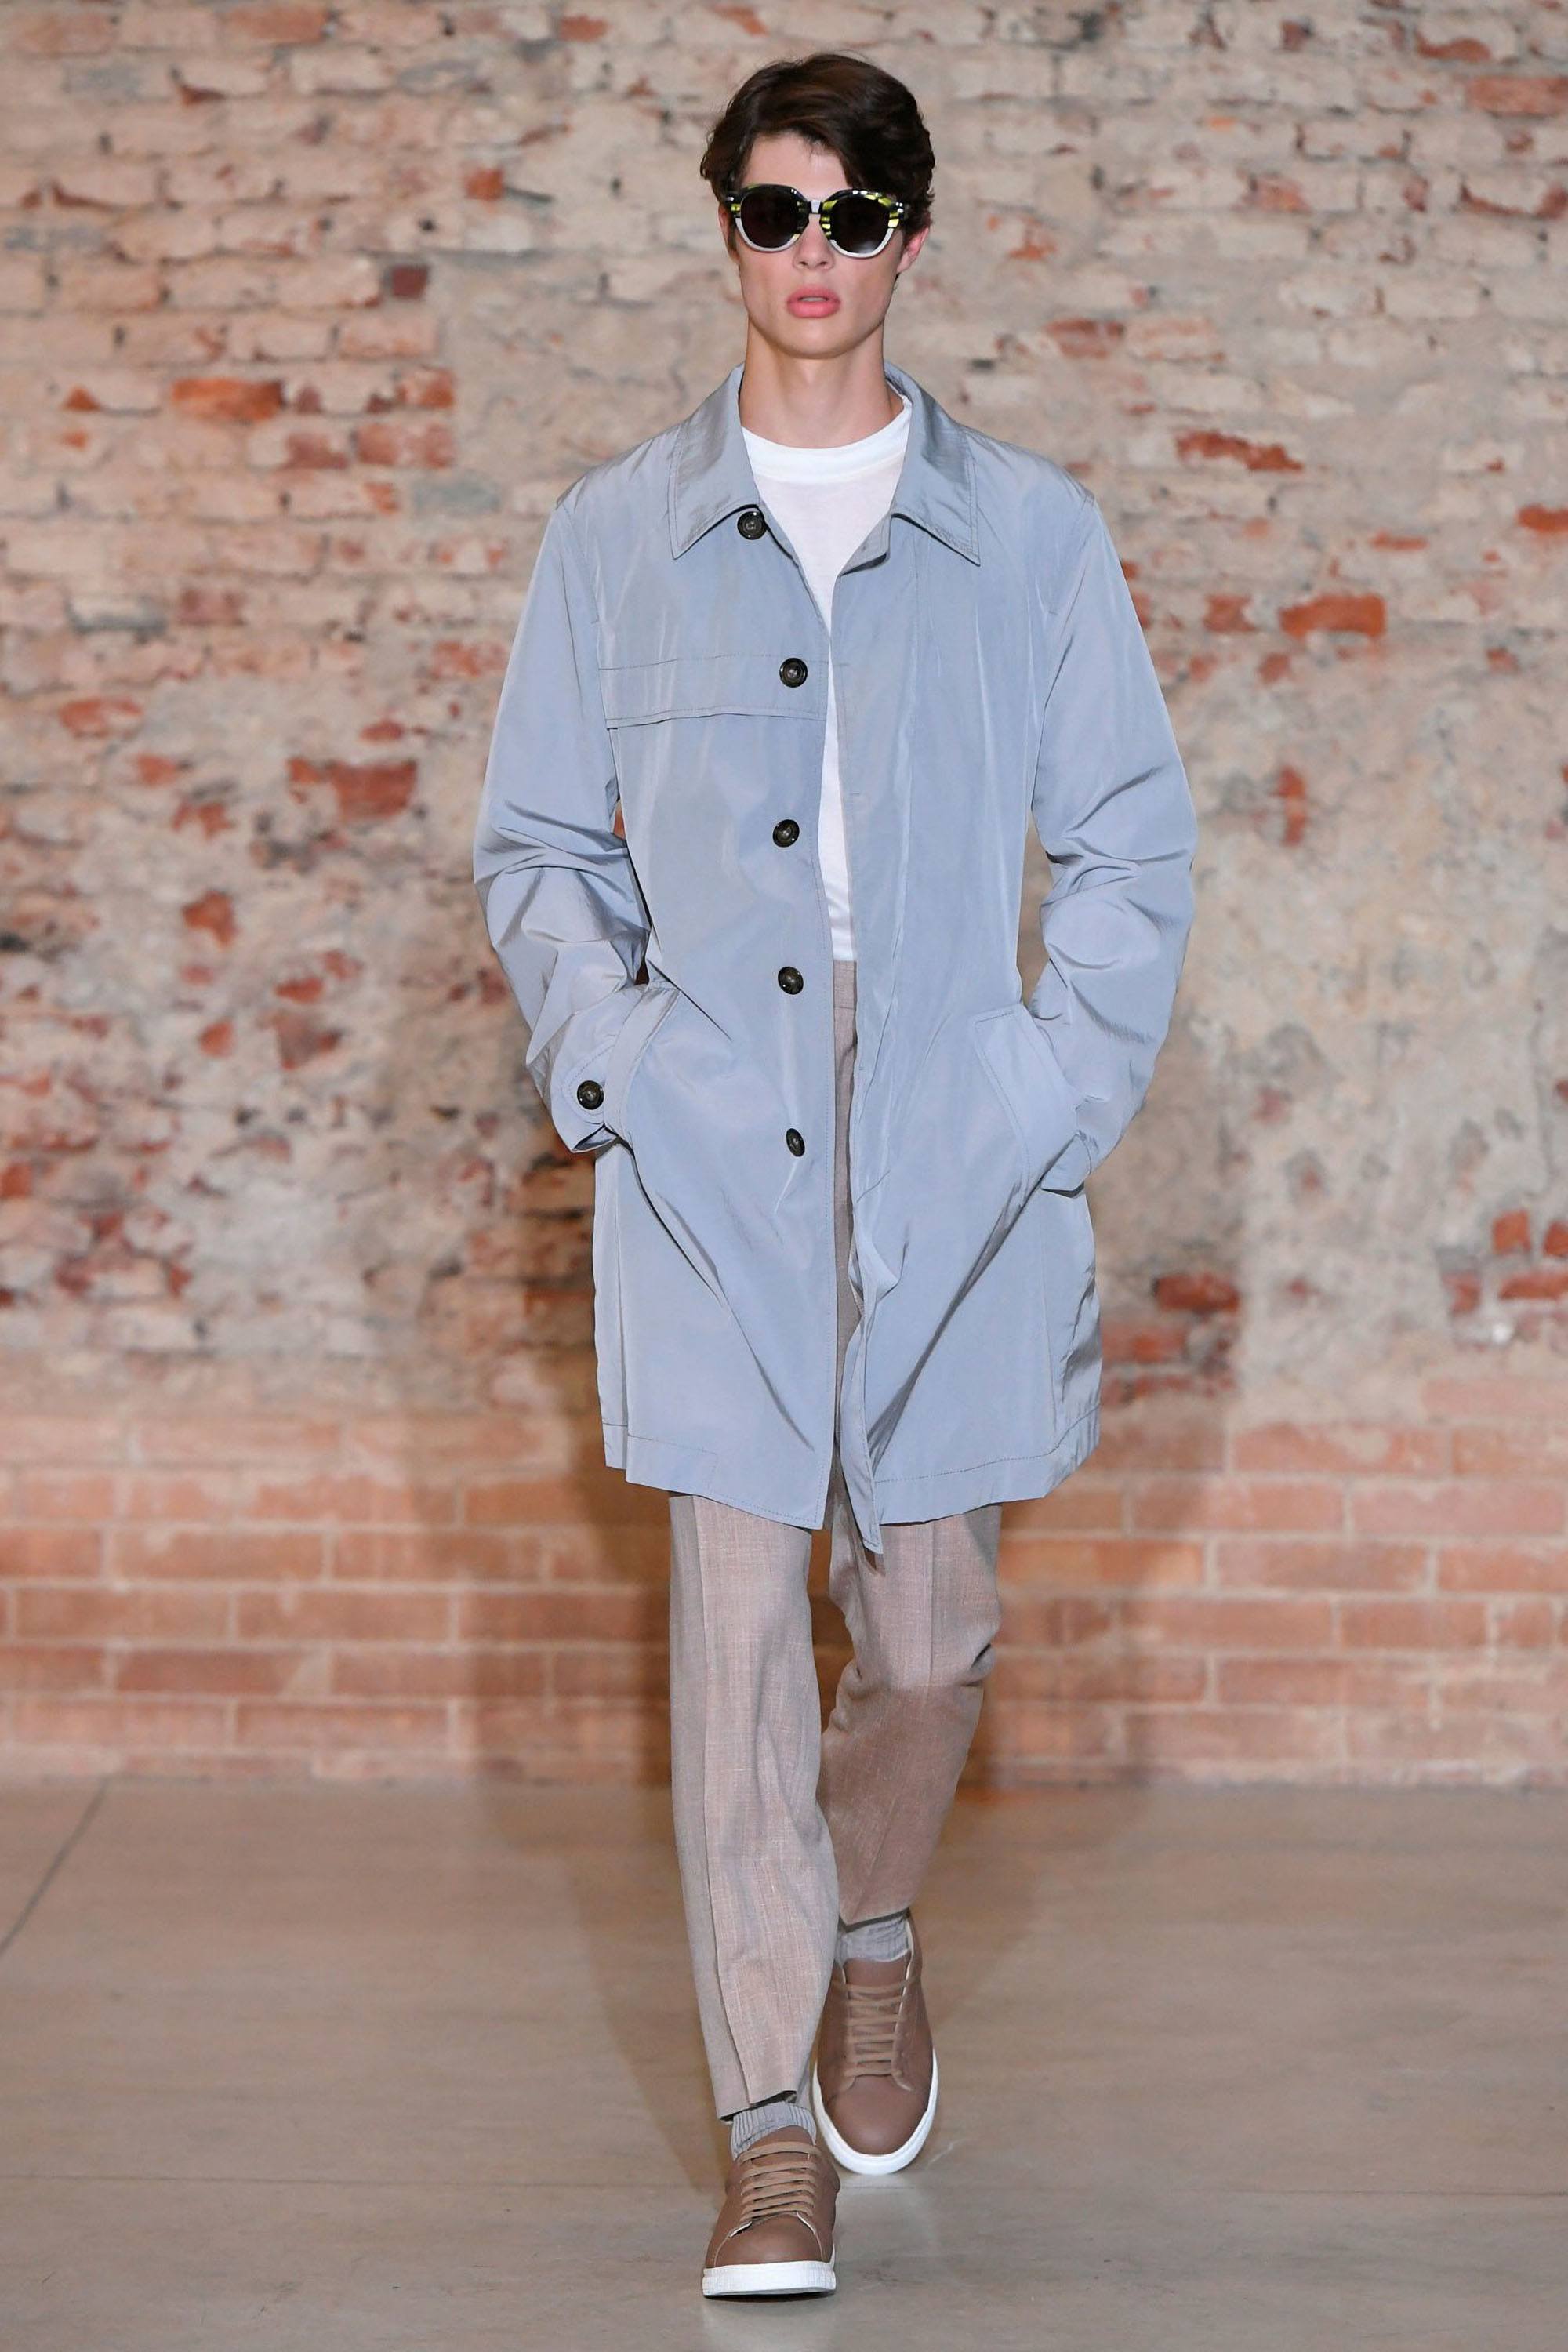 A jacket from Canali's Spring 2019